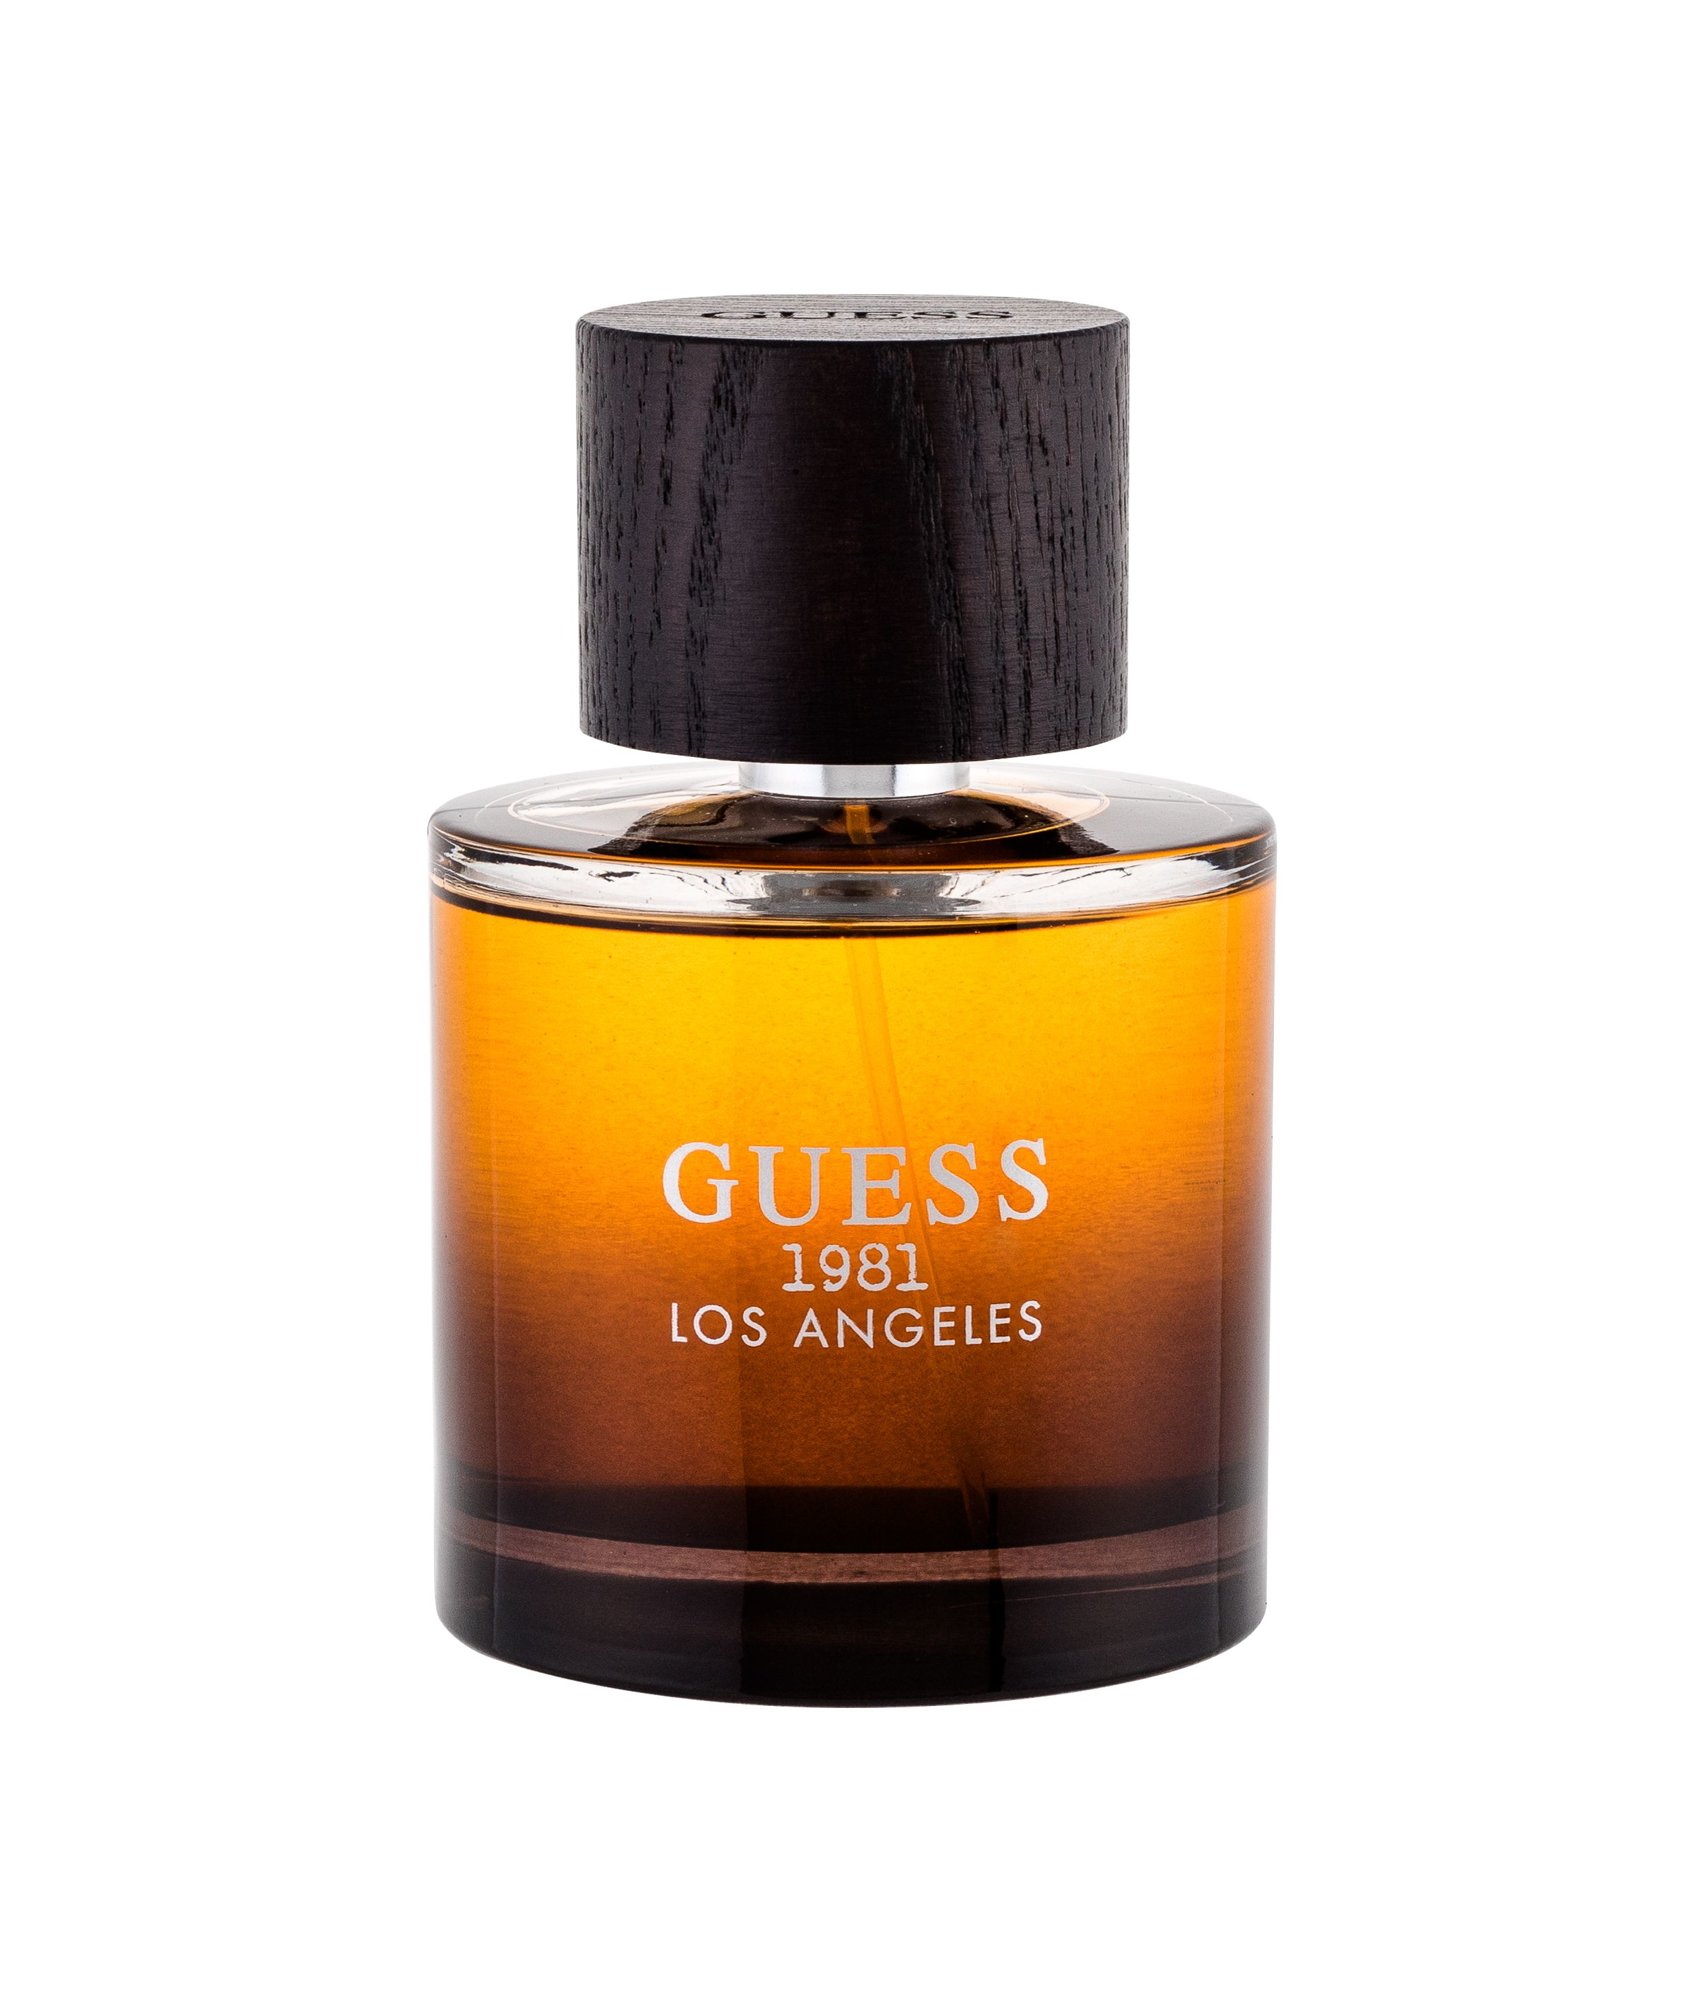 Guess 1981 Los Angeles, edt 100ml - Teszter